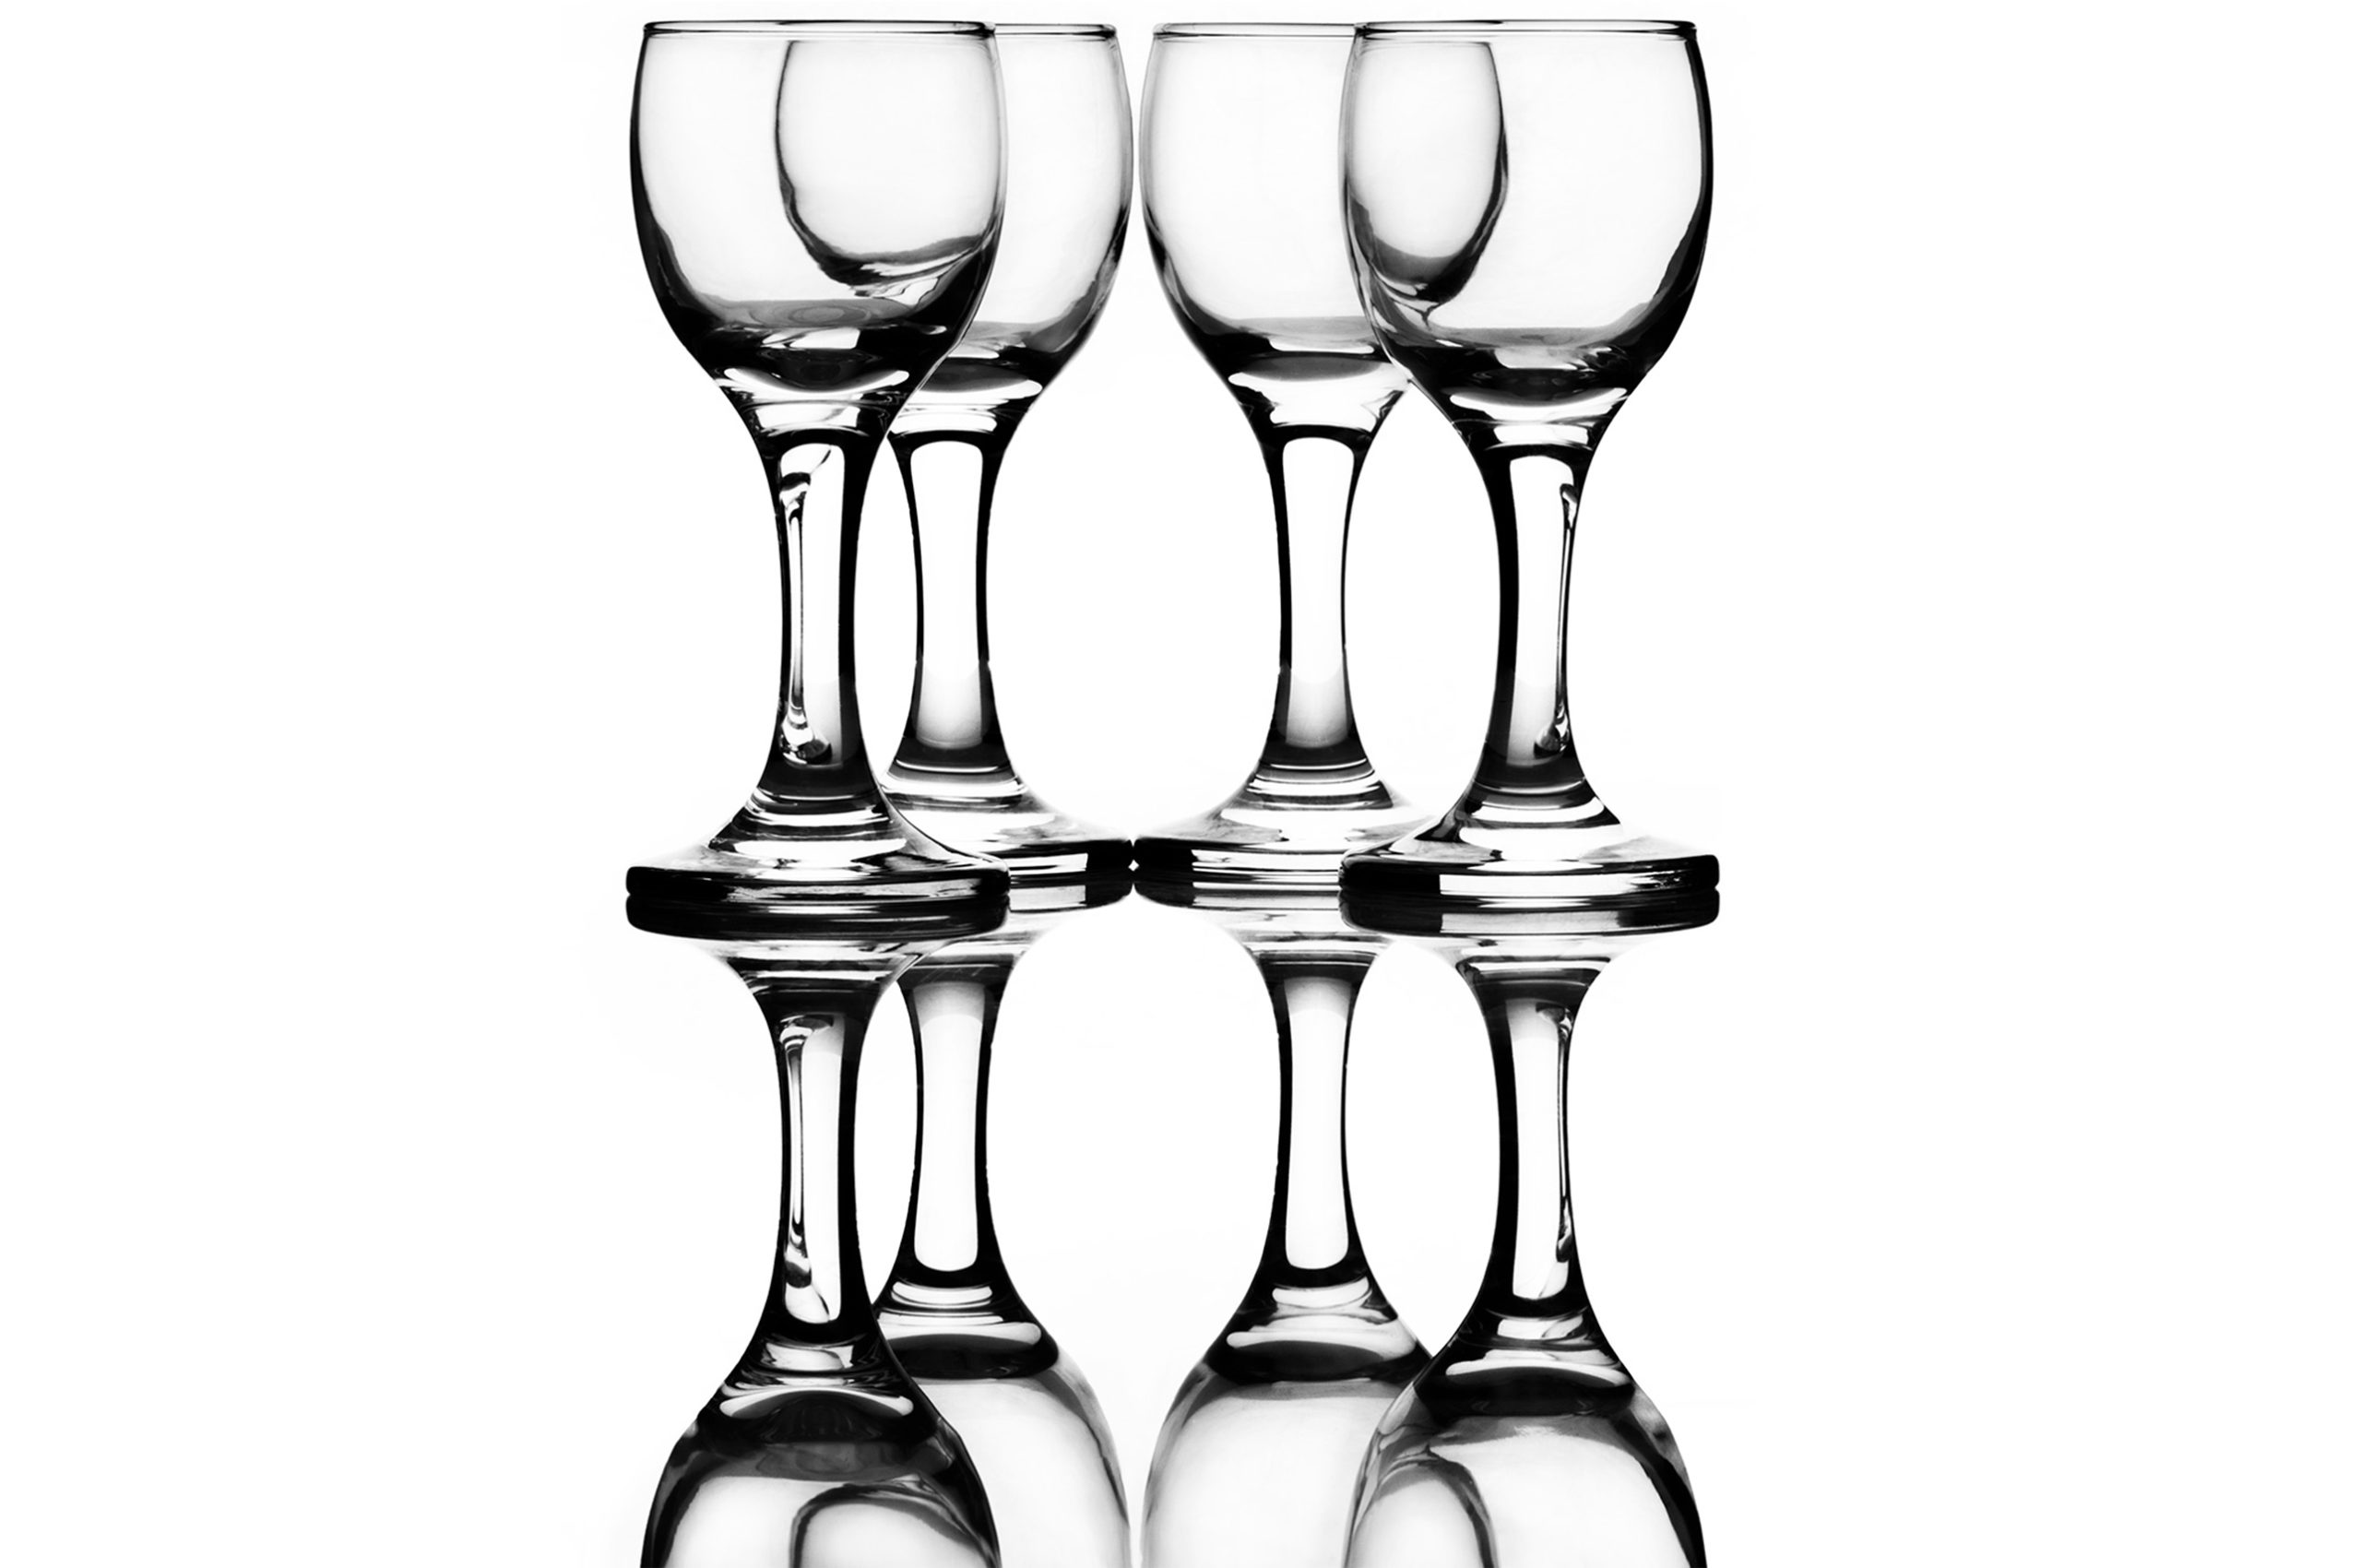 (After Editing) Set of Glassware photographed to show reflection on clear surface